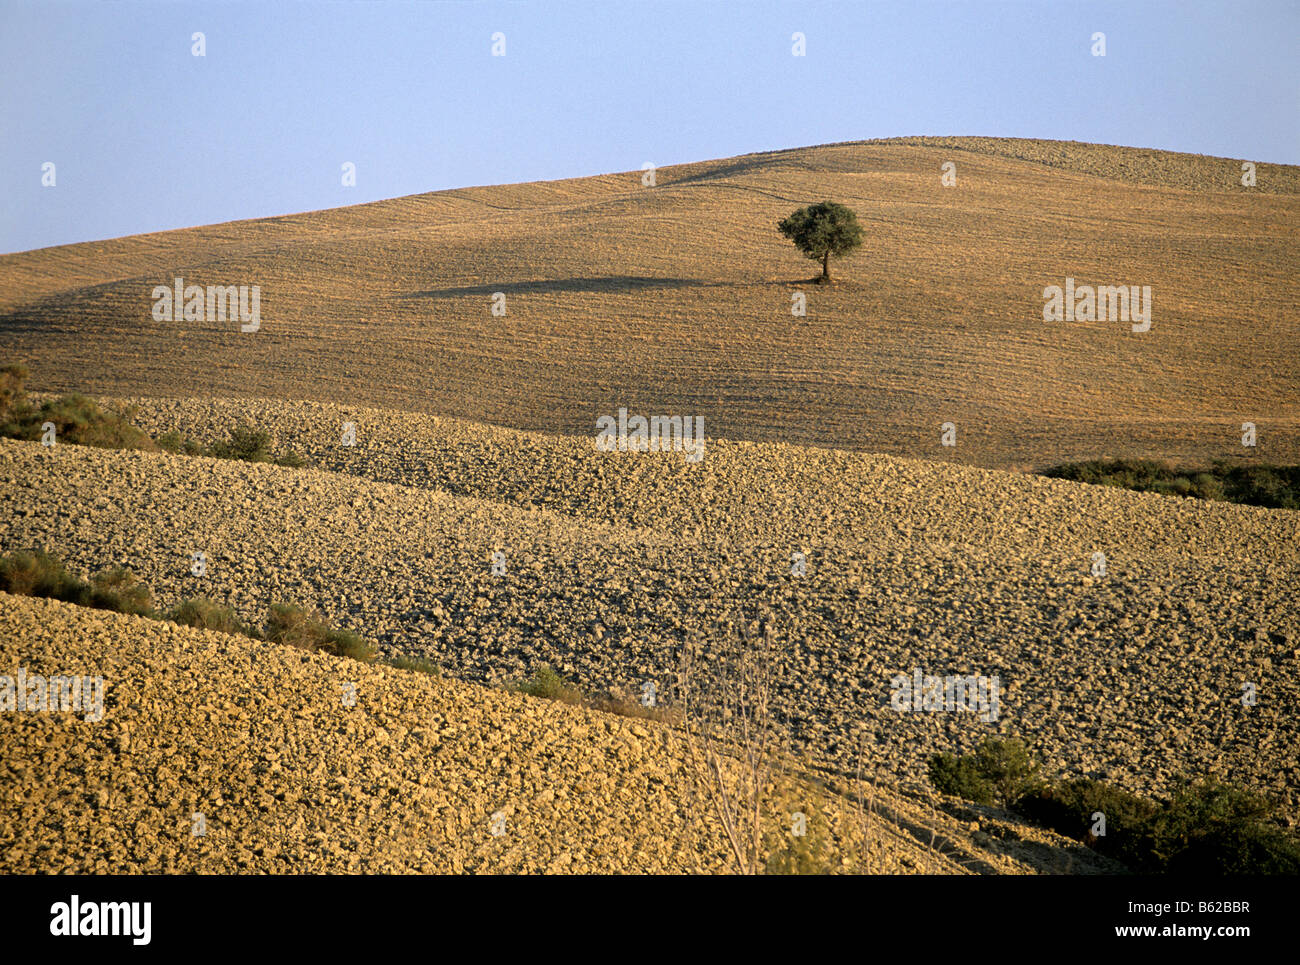 Solitary tree standing in a ploughed field, landscape, Val d' Orcia near Monticchiello, Province of Siena, Toscany, Italy, Euro Stock Photo